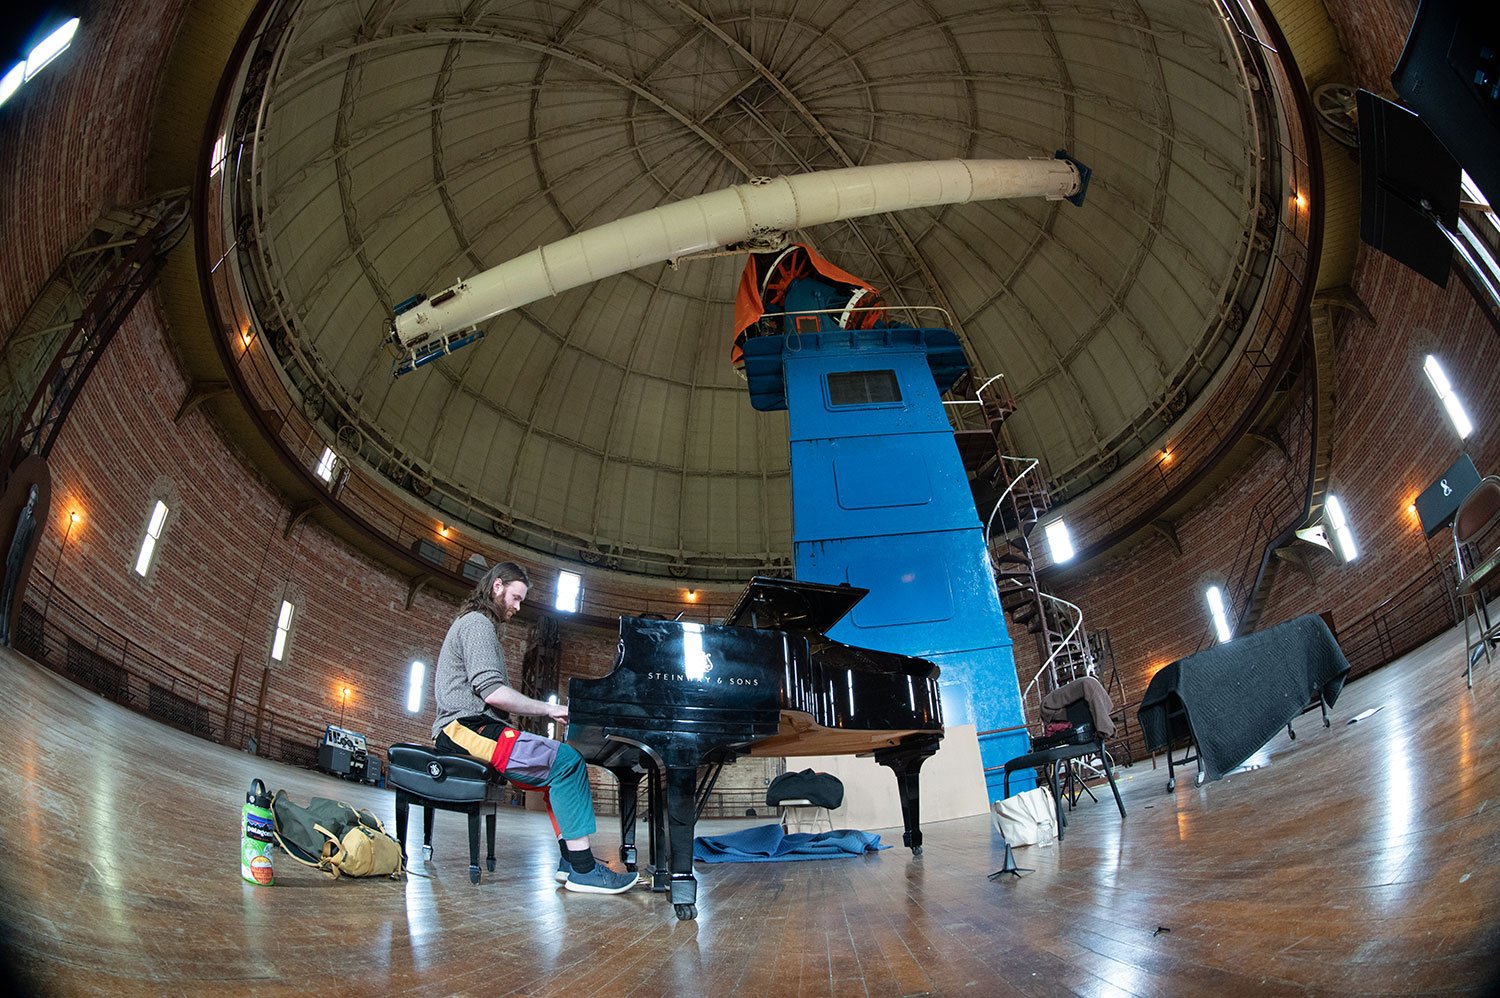  Yerkes Observatory is the site for Lab 2023. Located 90 miles northwest of downtown Chicago, “ the birthplace of modern astrophysics” is the centerpiece for the immersion, with the town of Lake Geneva, Wisconsin as its backdrop. 